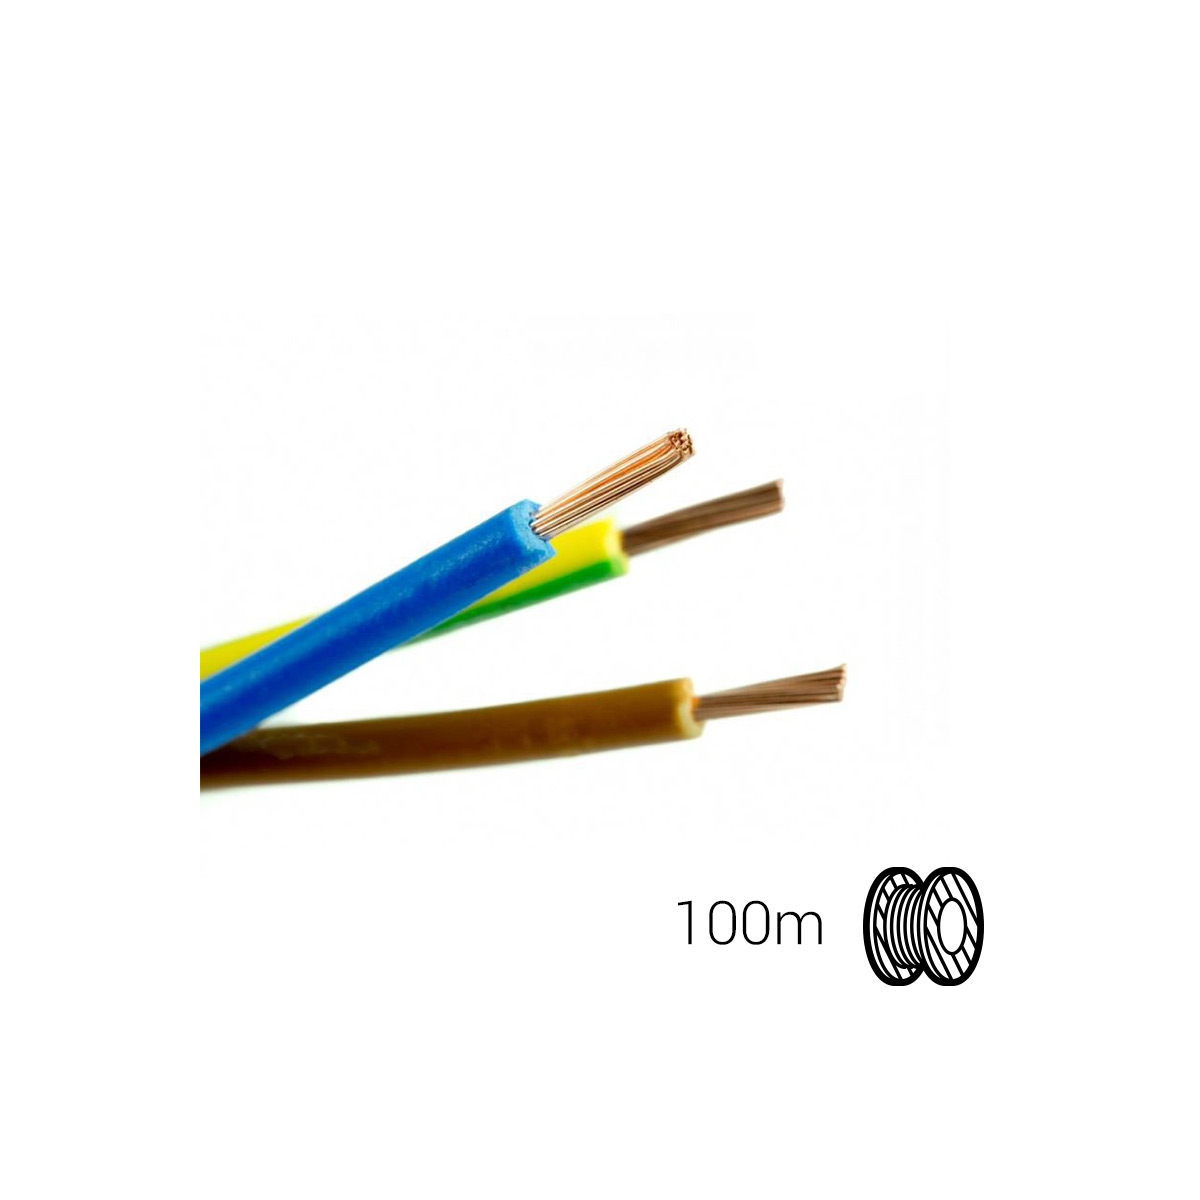 Halogen-free cable 6mm² H07Z1-K 100m